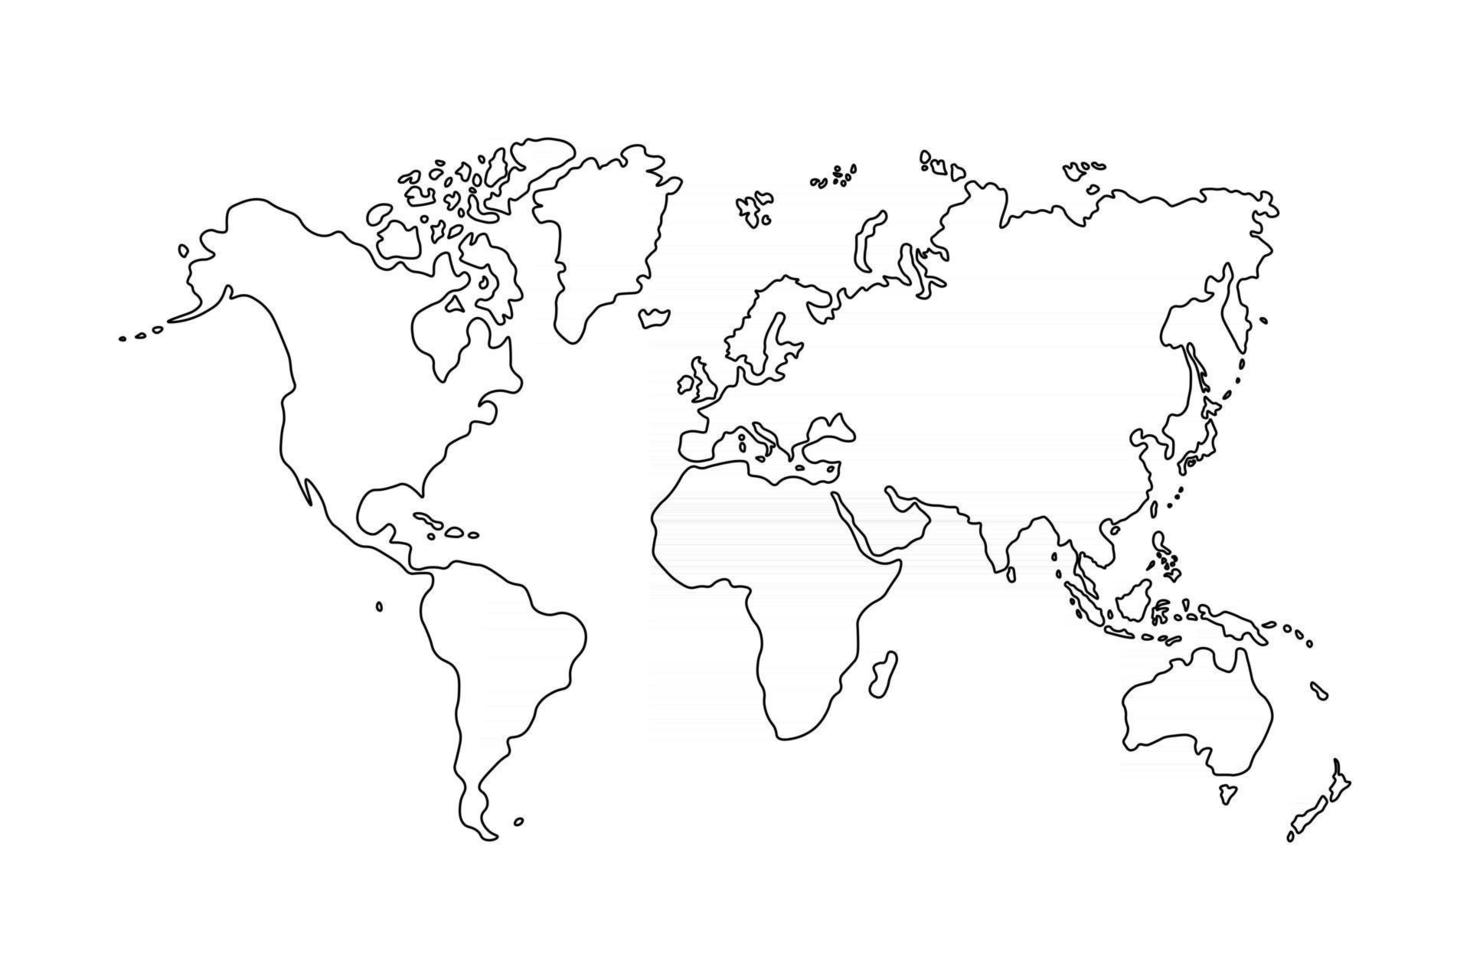 Outline of world map on white background vector